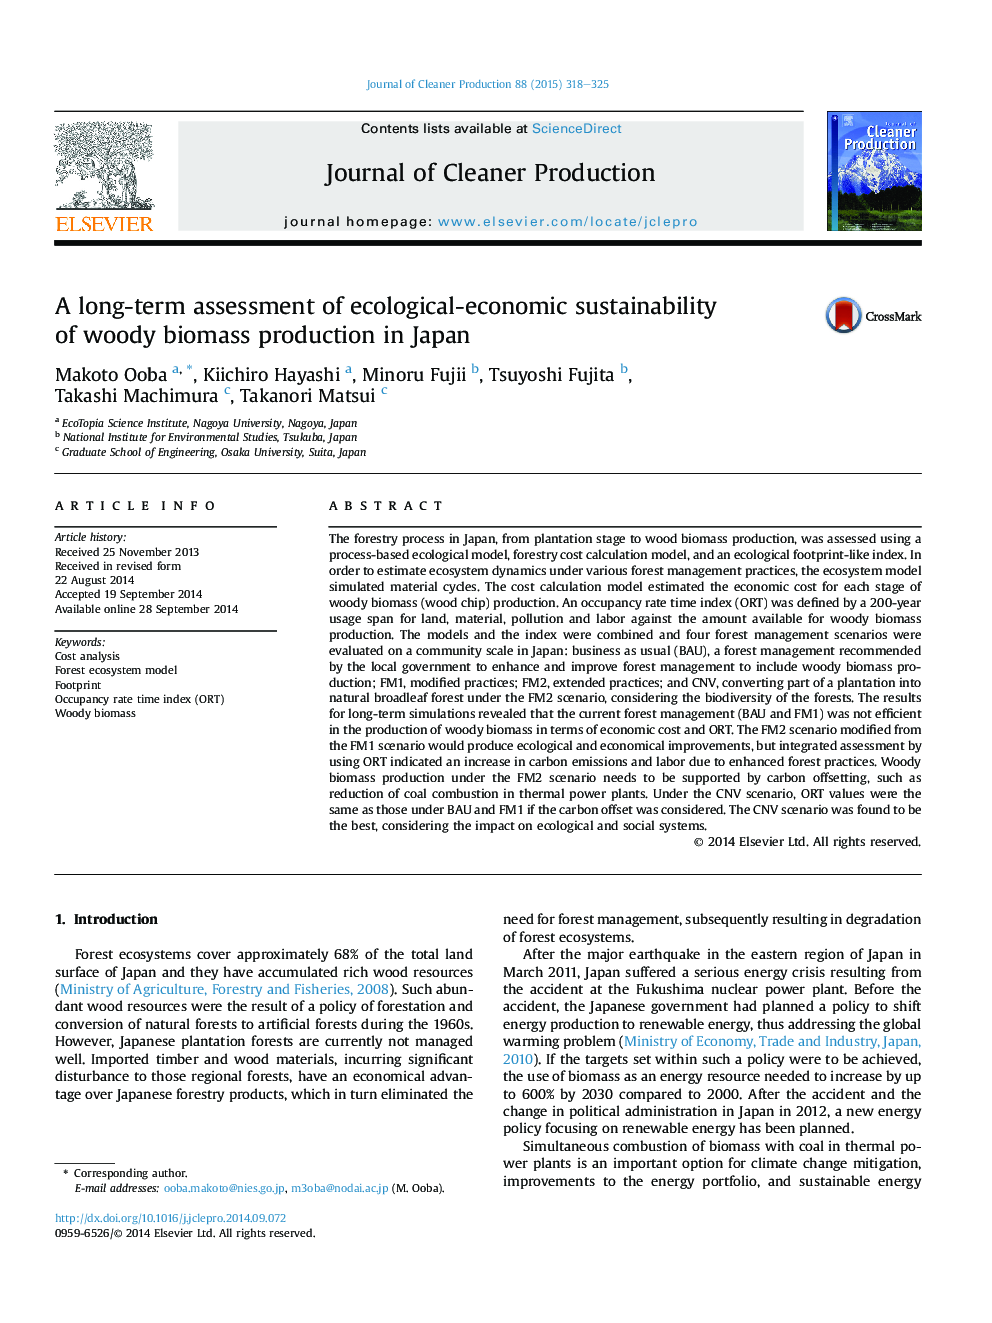 A long-term assessment of ecological-economic sustainability of woody biomass production in Japan